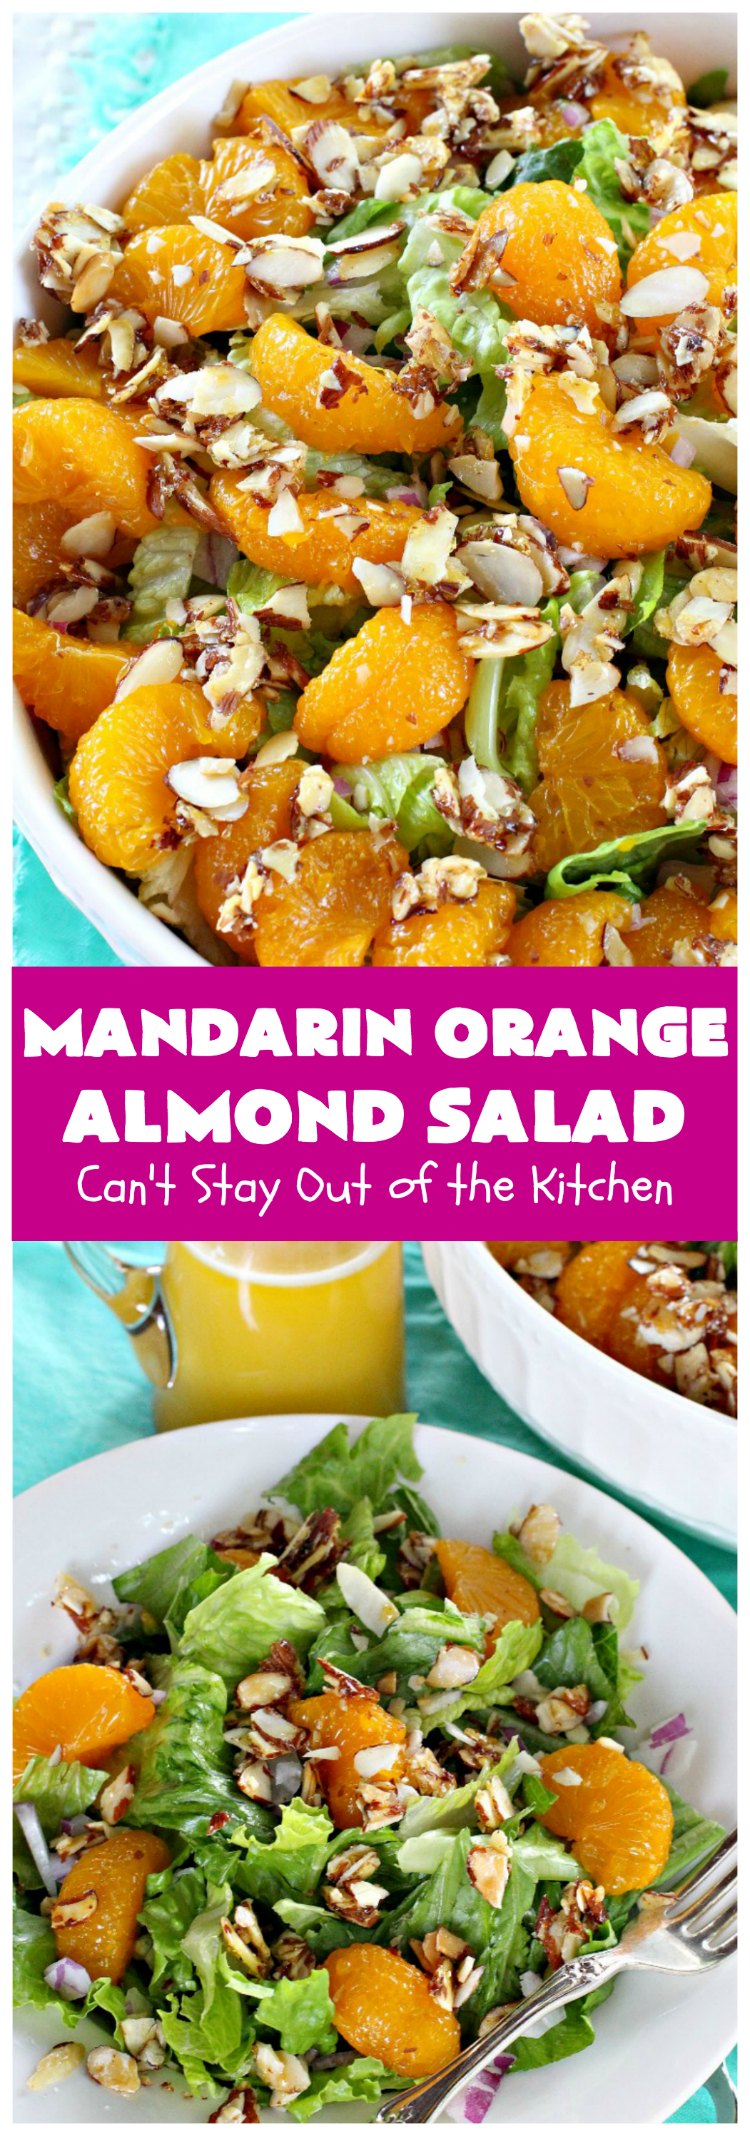 Mandarin Orange Almond Salad | Can't Stay Out of the Kitchen | this delightful #salad uses #MandarinOranges & glazed #almonds. It's festive & easy enough for company or #holiday dinners like #FathersDay. #Oranges #GlutenFree #MandarinOrangeAlmondSalad #MandarinOrangeSalad #Vegan 